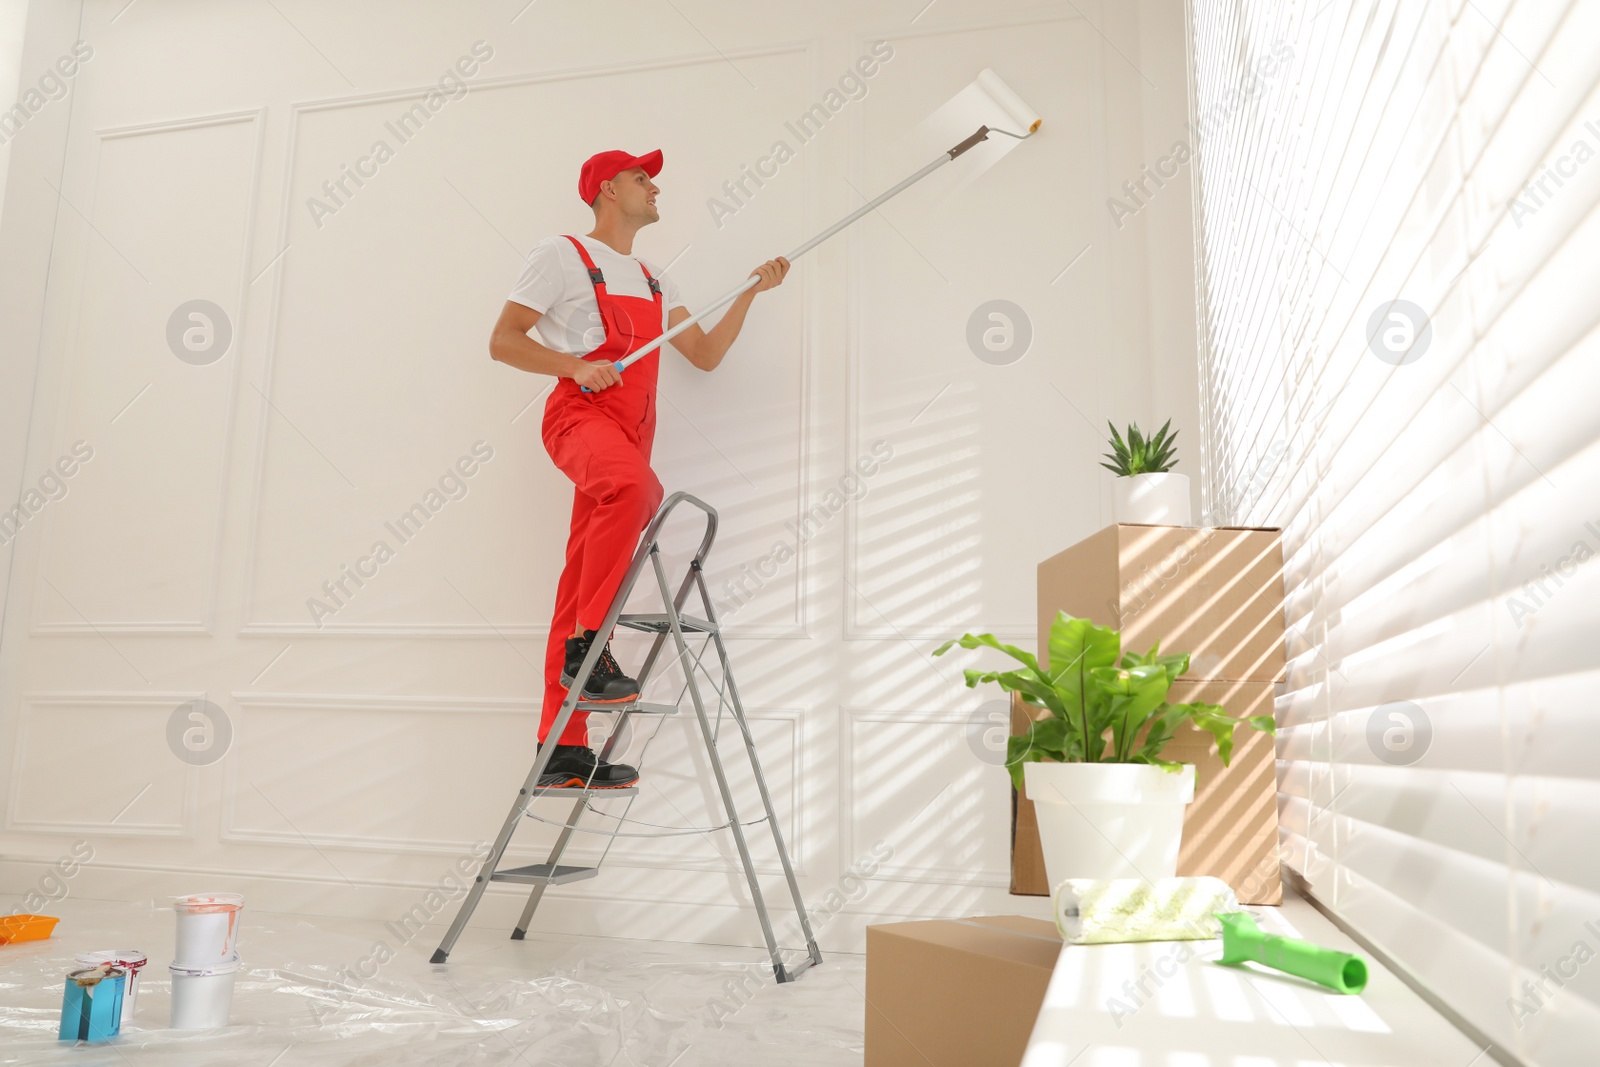 Photo of Worker painting wall with roller on ladder indoors